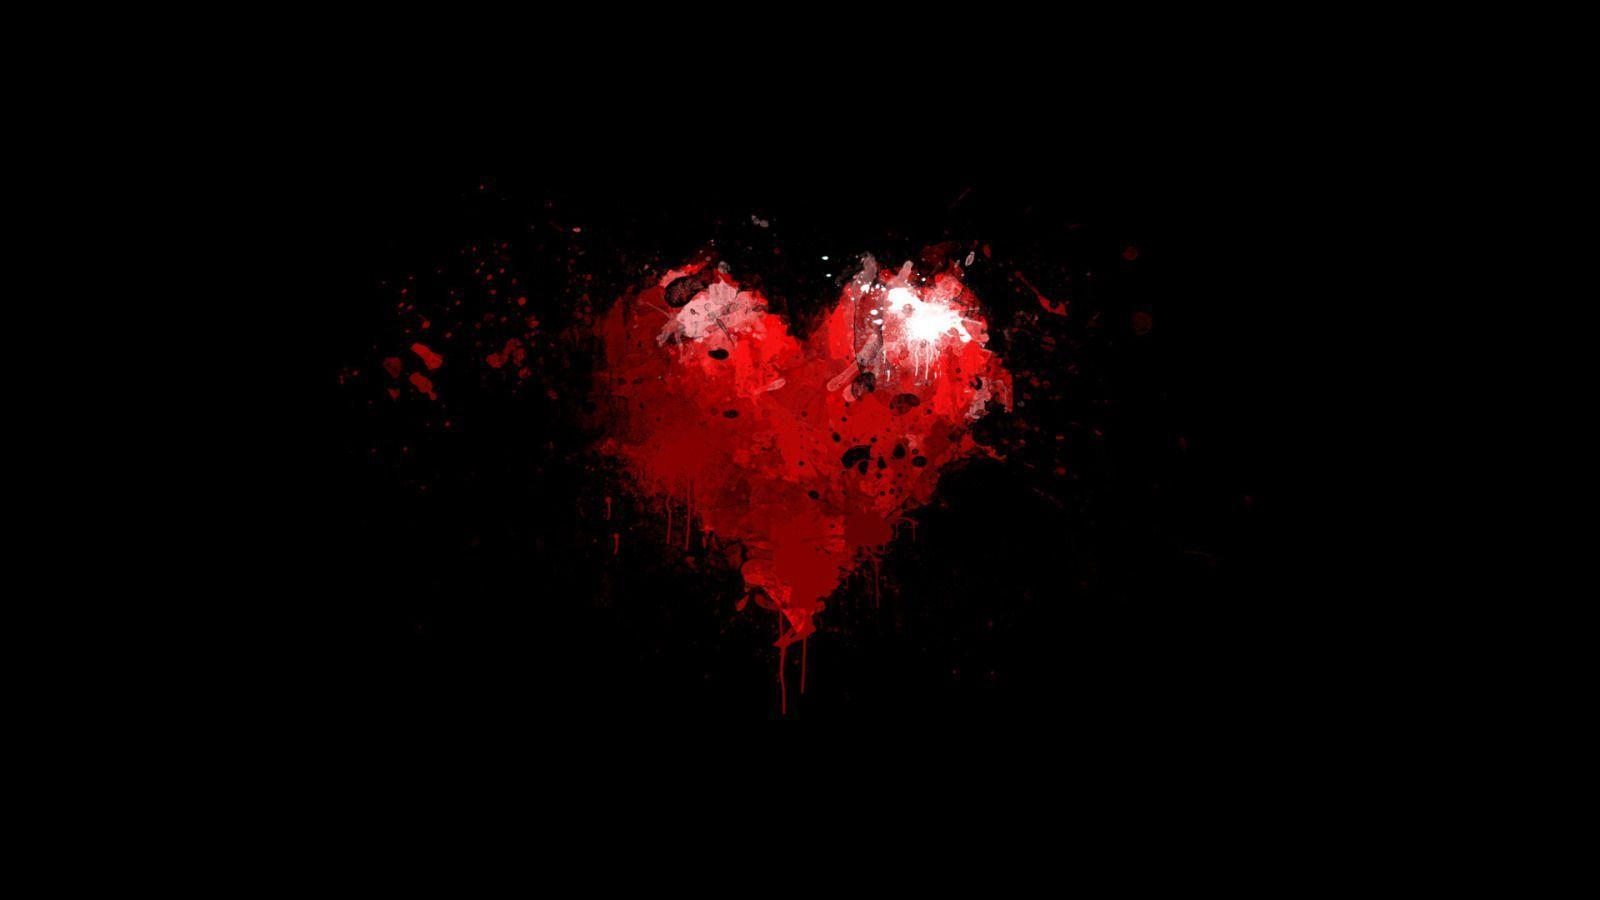 Painted Red Heart on Black Background widescreen wallpaper. Wide